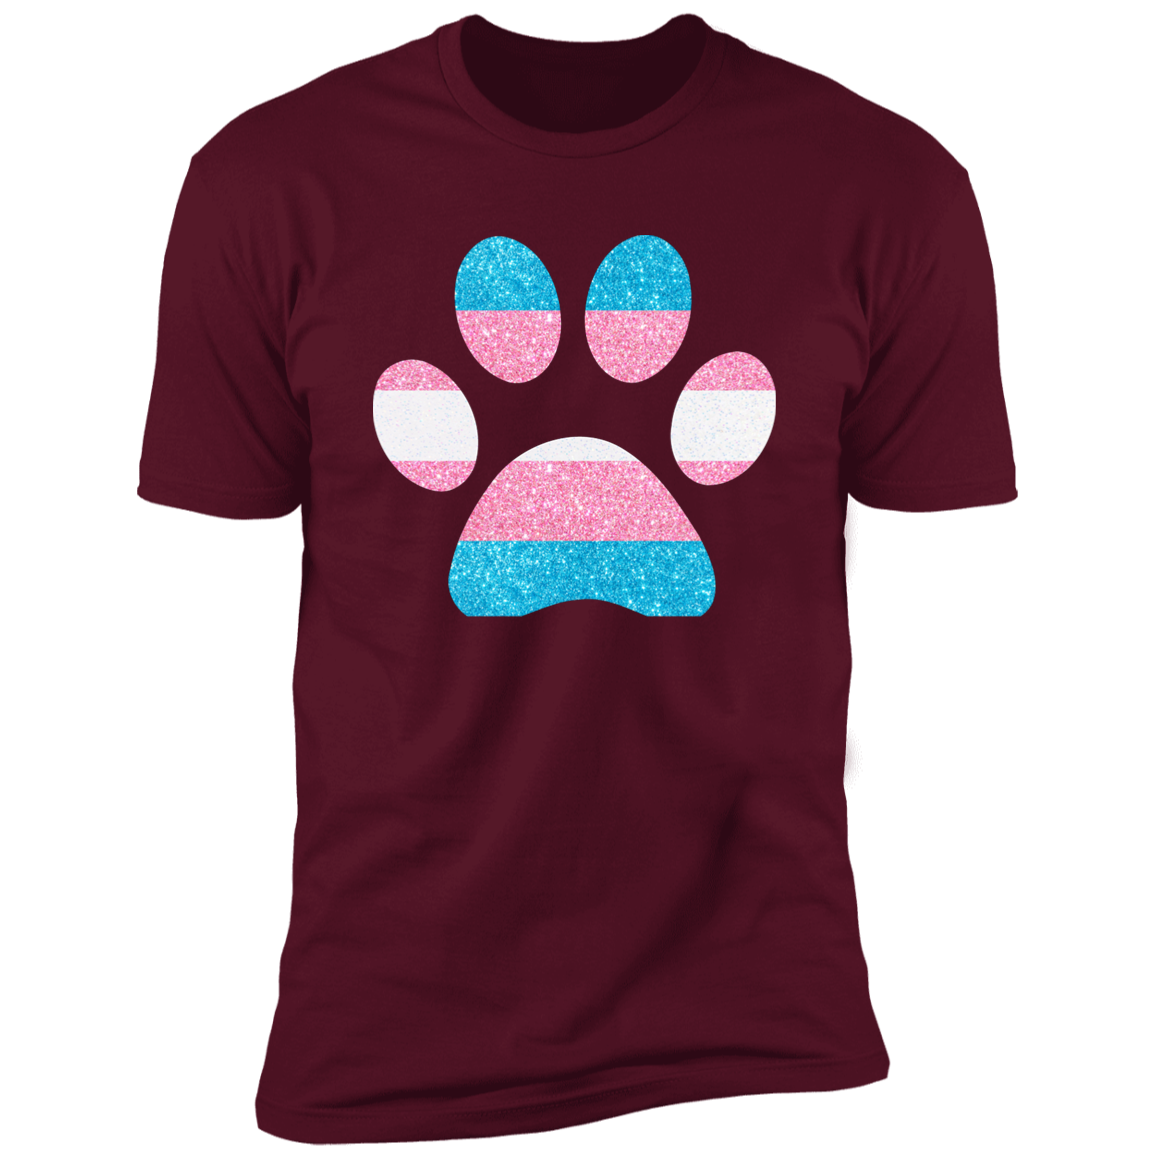 Dog Paw Trans Pride t-shirt, dog trans pride dog shirt for humans, in maroon